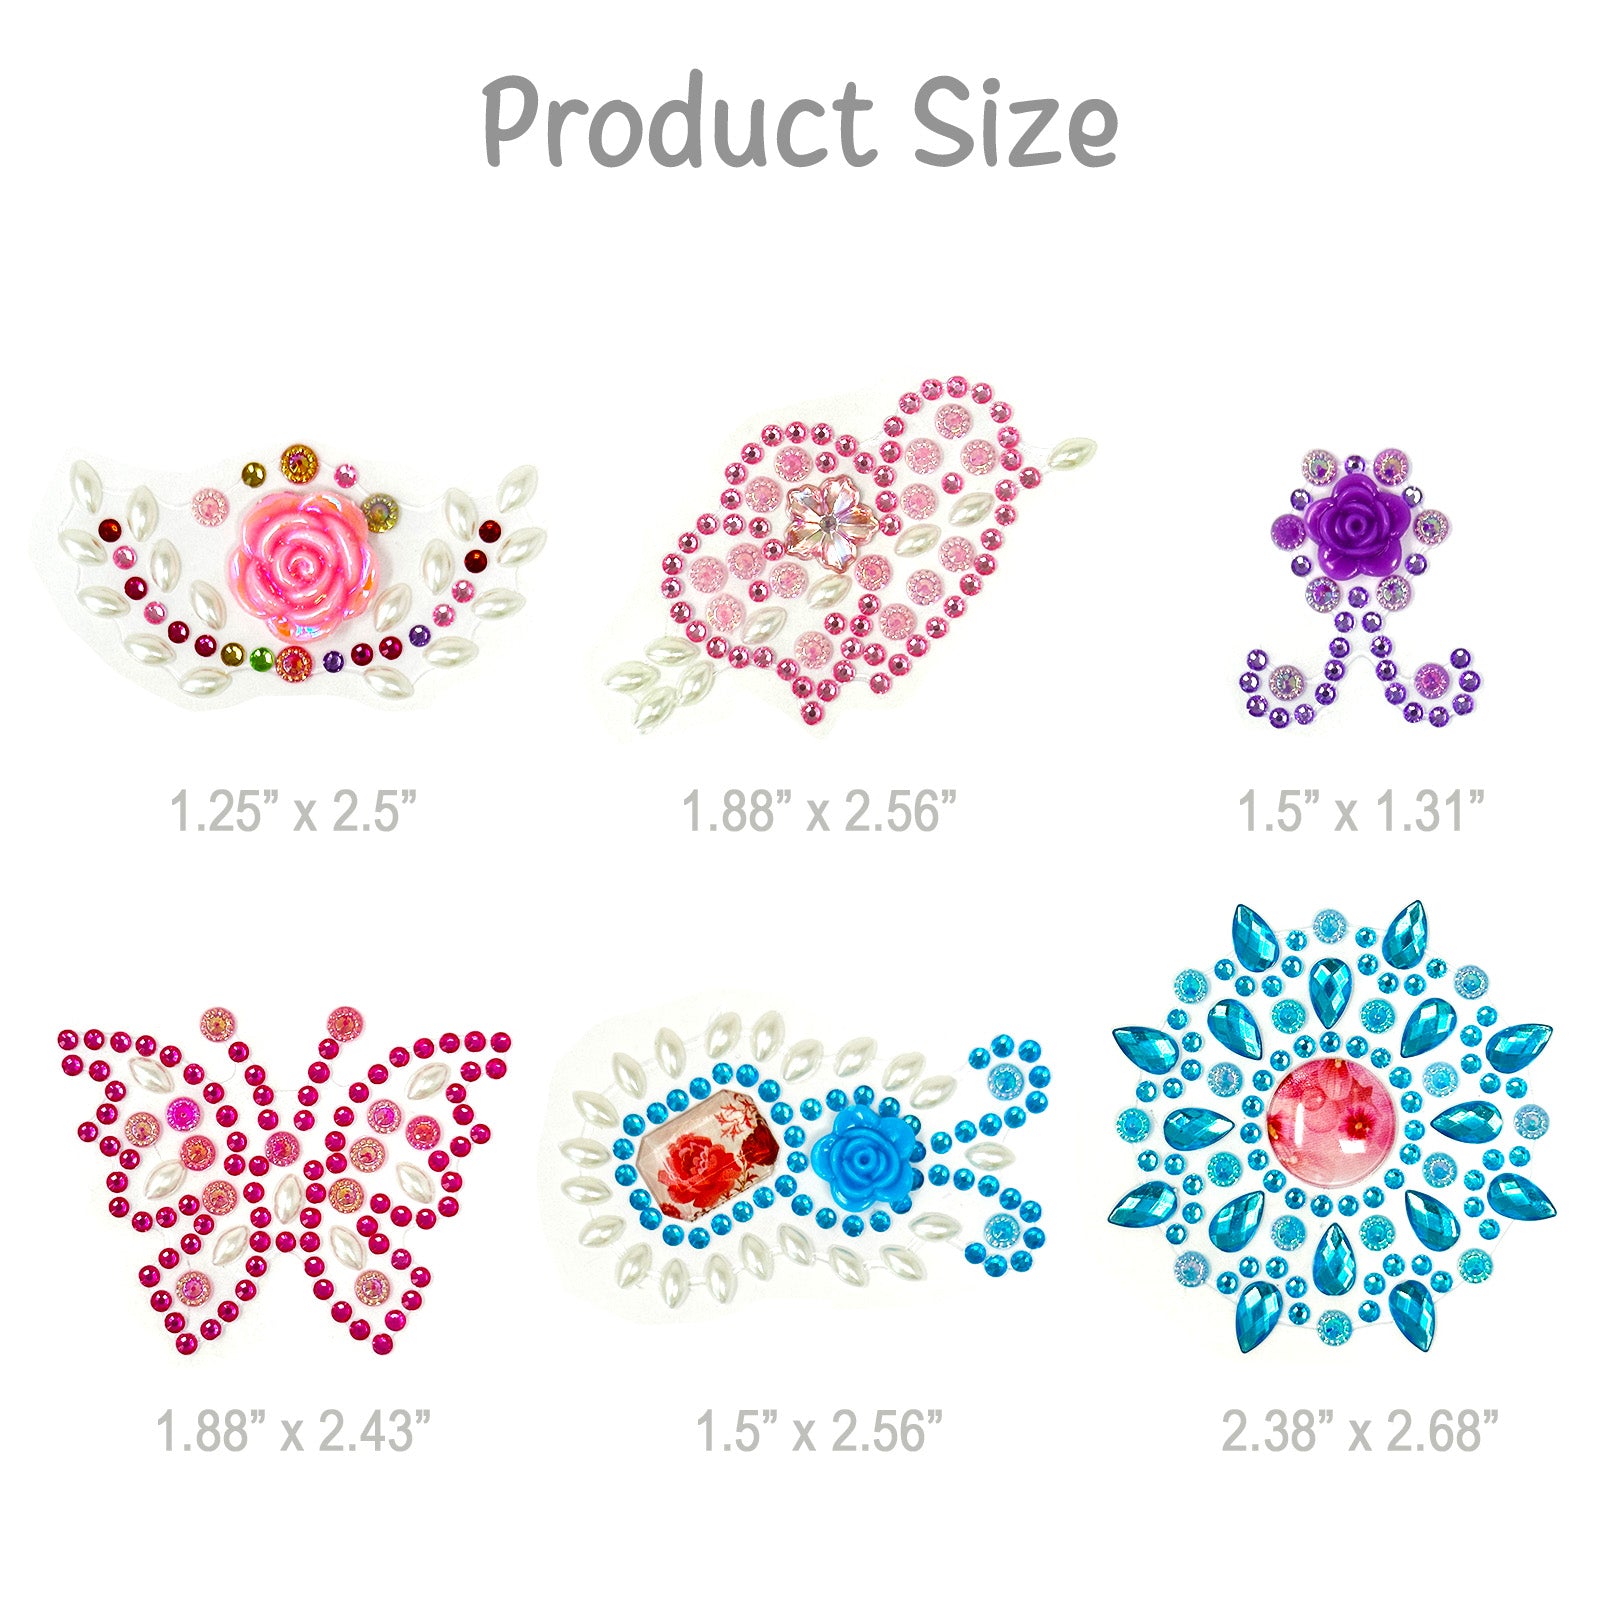 Wrapables Crystal Rhinestone Gem Stickers, Bling Jewel Adhesives for DIY Arts & Crafts, Smartphones, Water Bottles, Sunglass Cases (Set of 6) Hearts